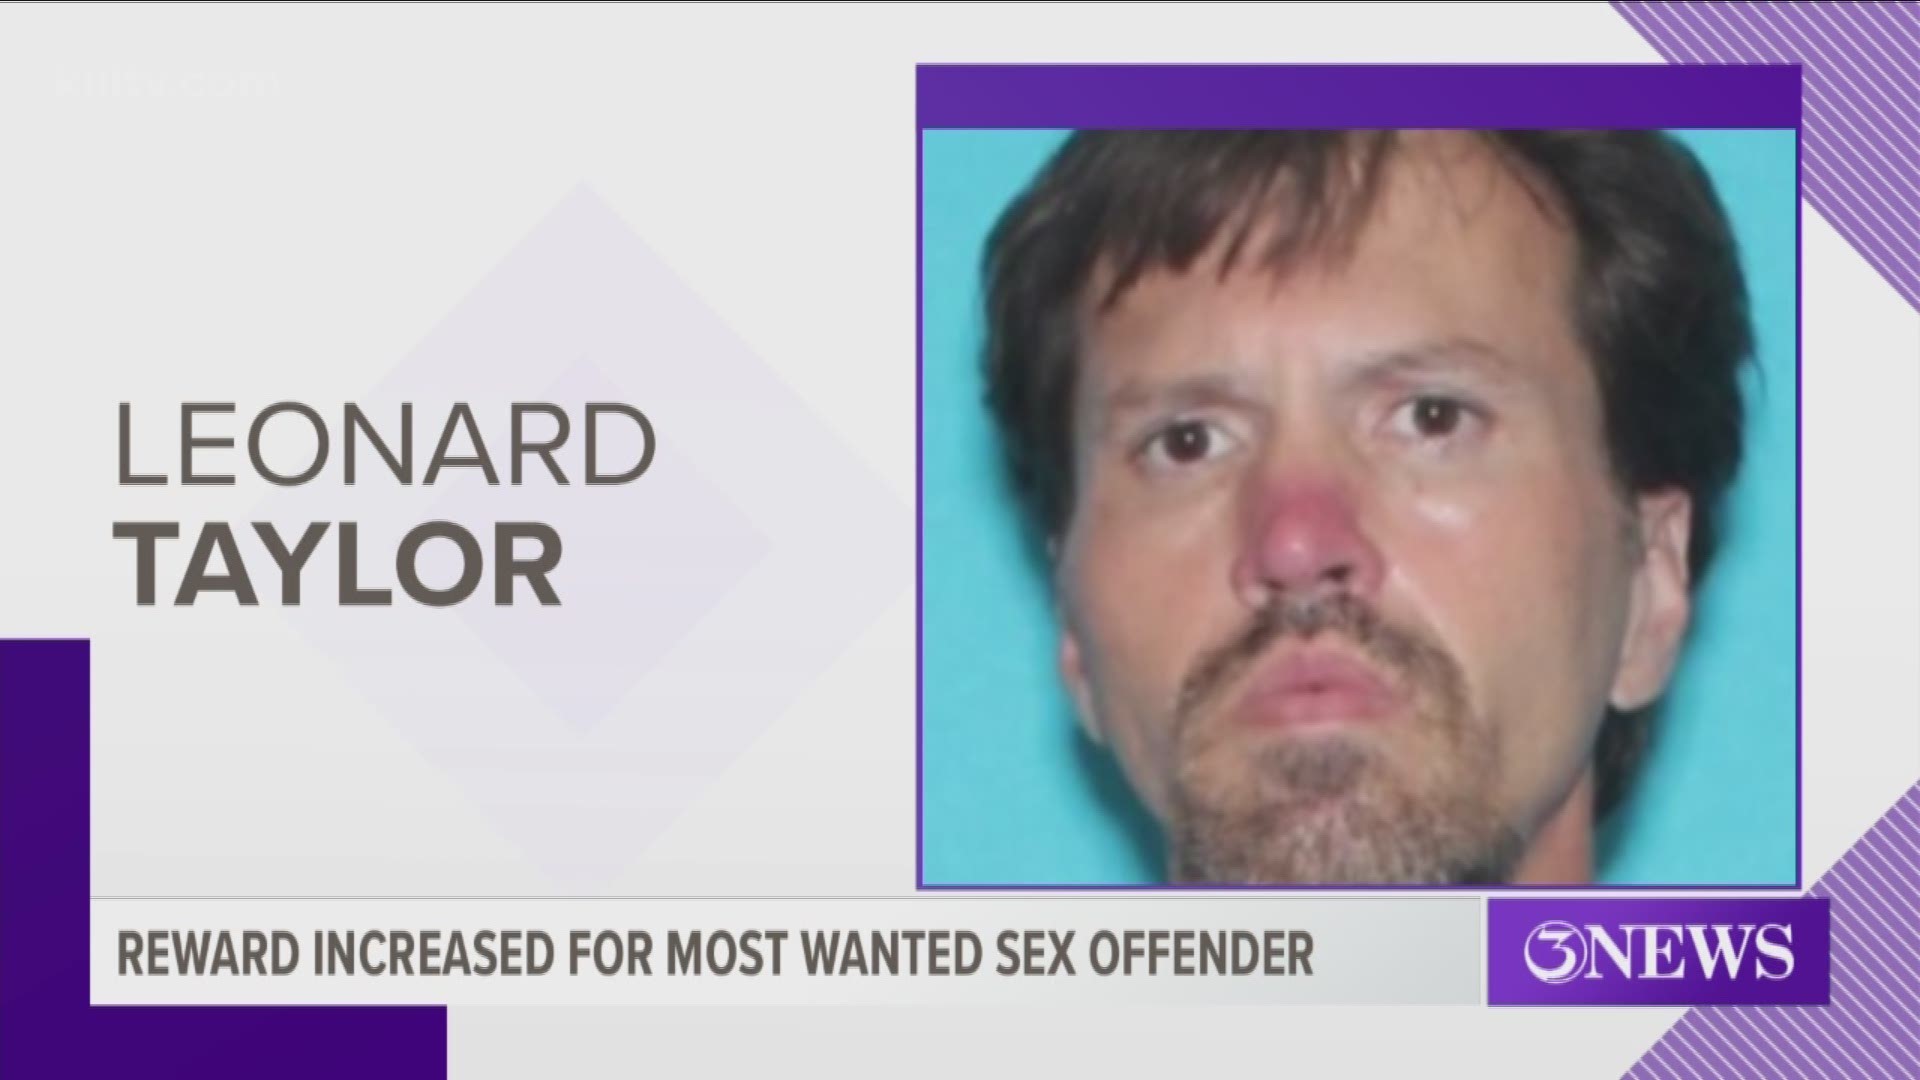 The reward for information leading to the capture of one of Texas' 10 Most Wanted sex offenders has been increased to $8,000, according to the Texas Department of Public Safety.